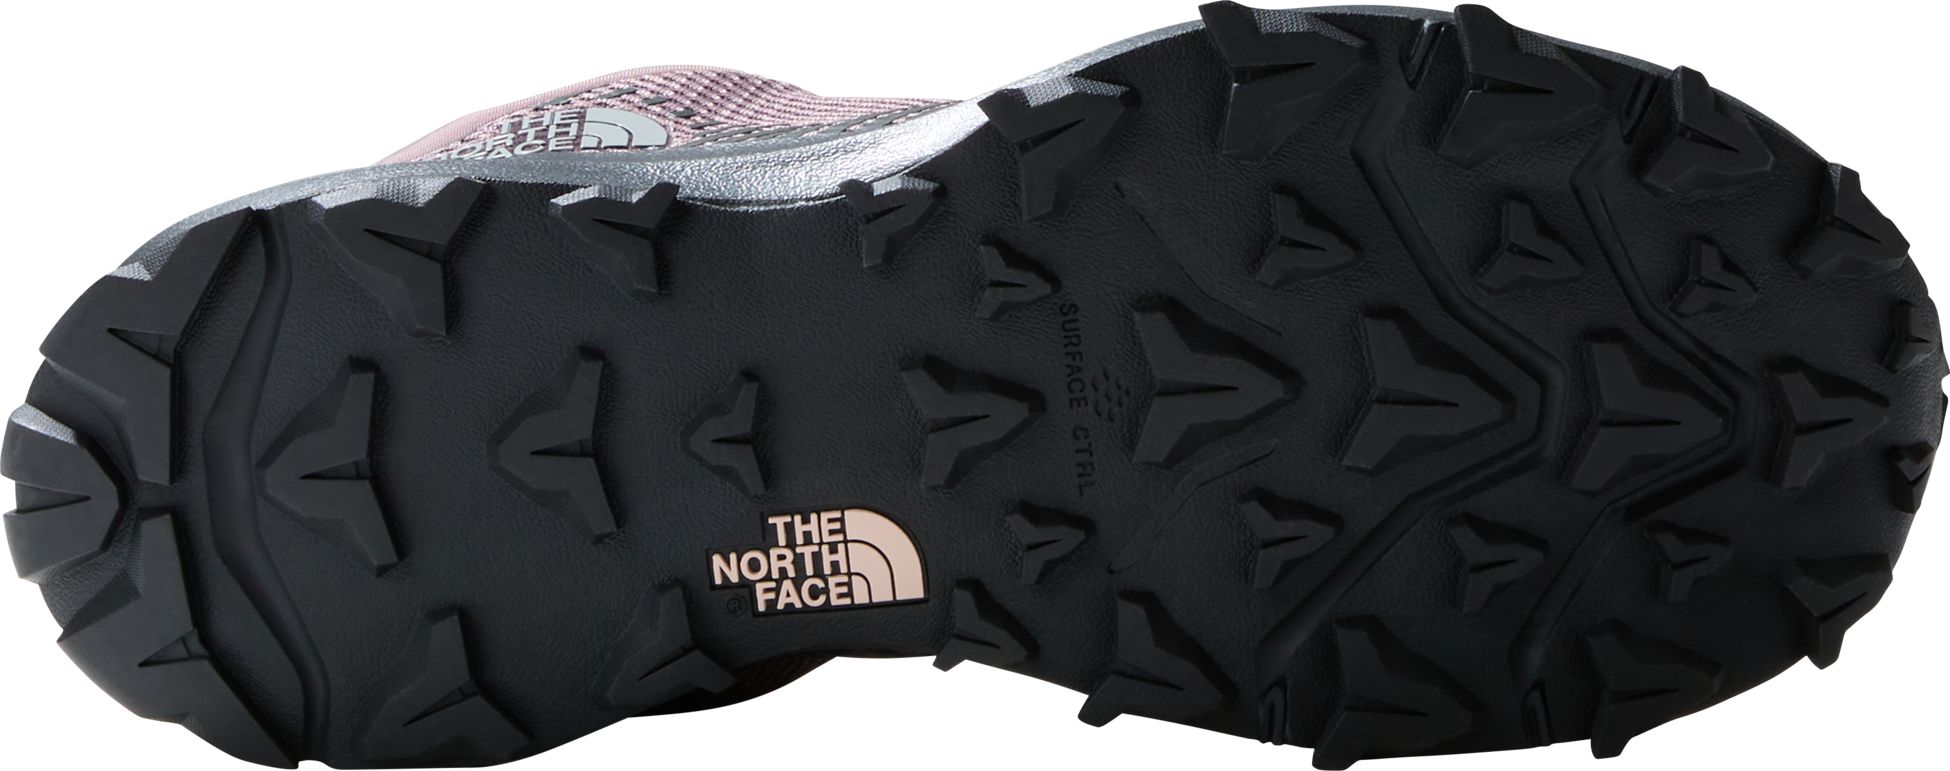 THE NORTH FACE, W VECTIV FASTPACK FUTURELIGHT